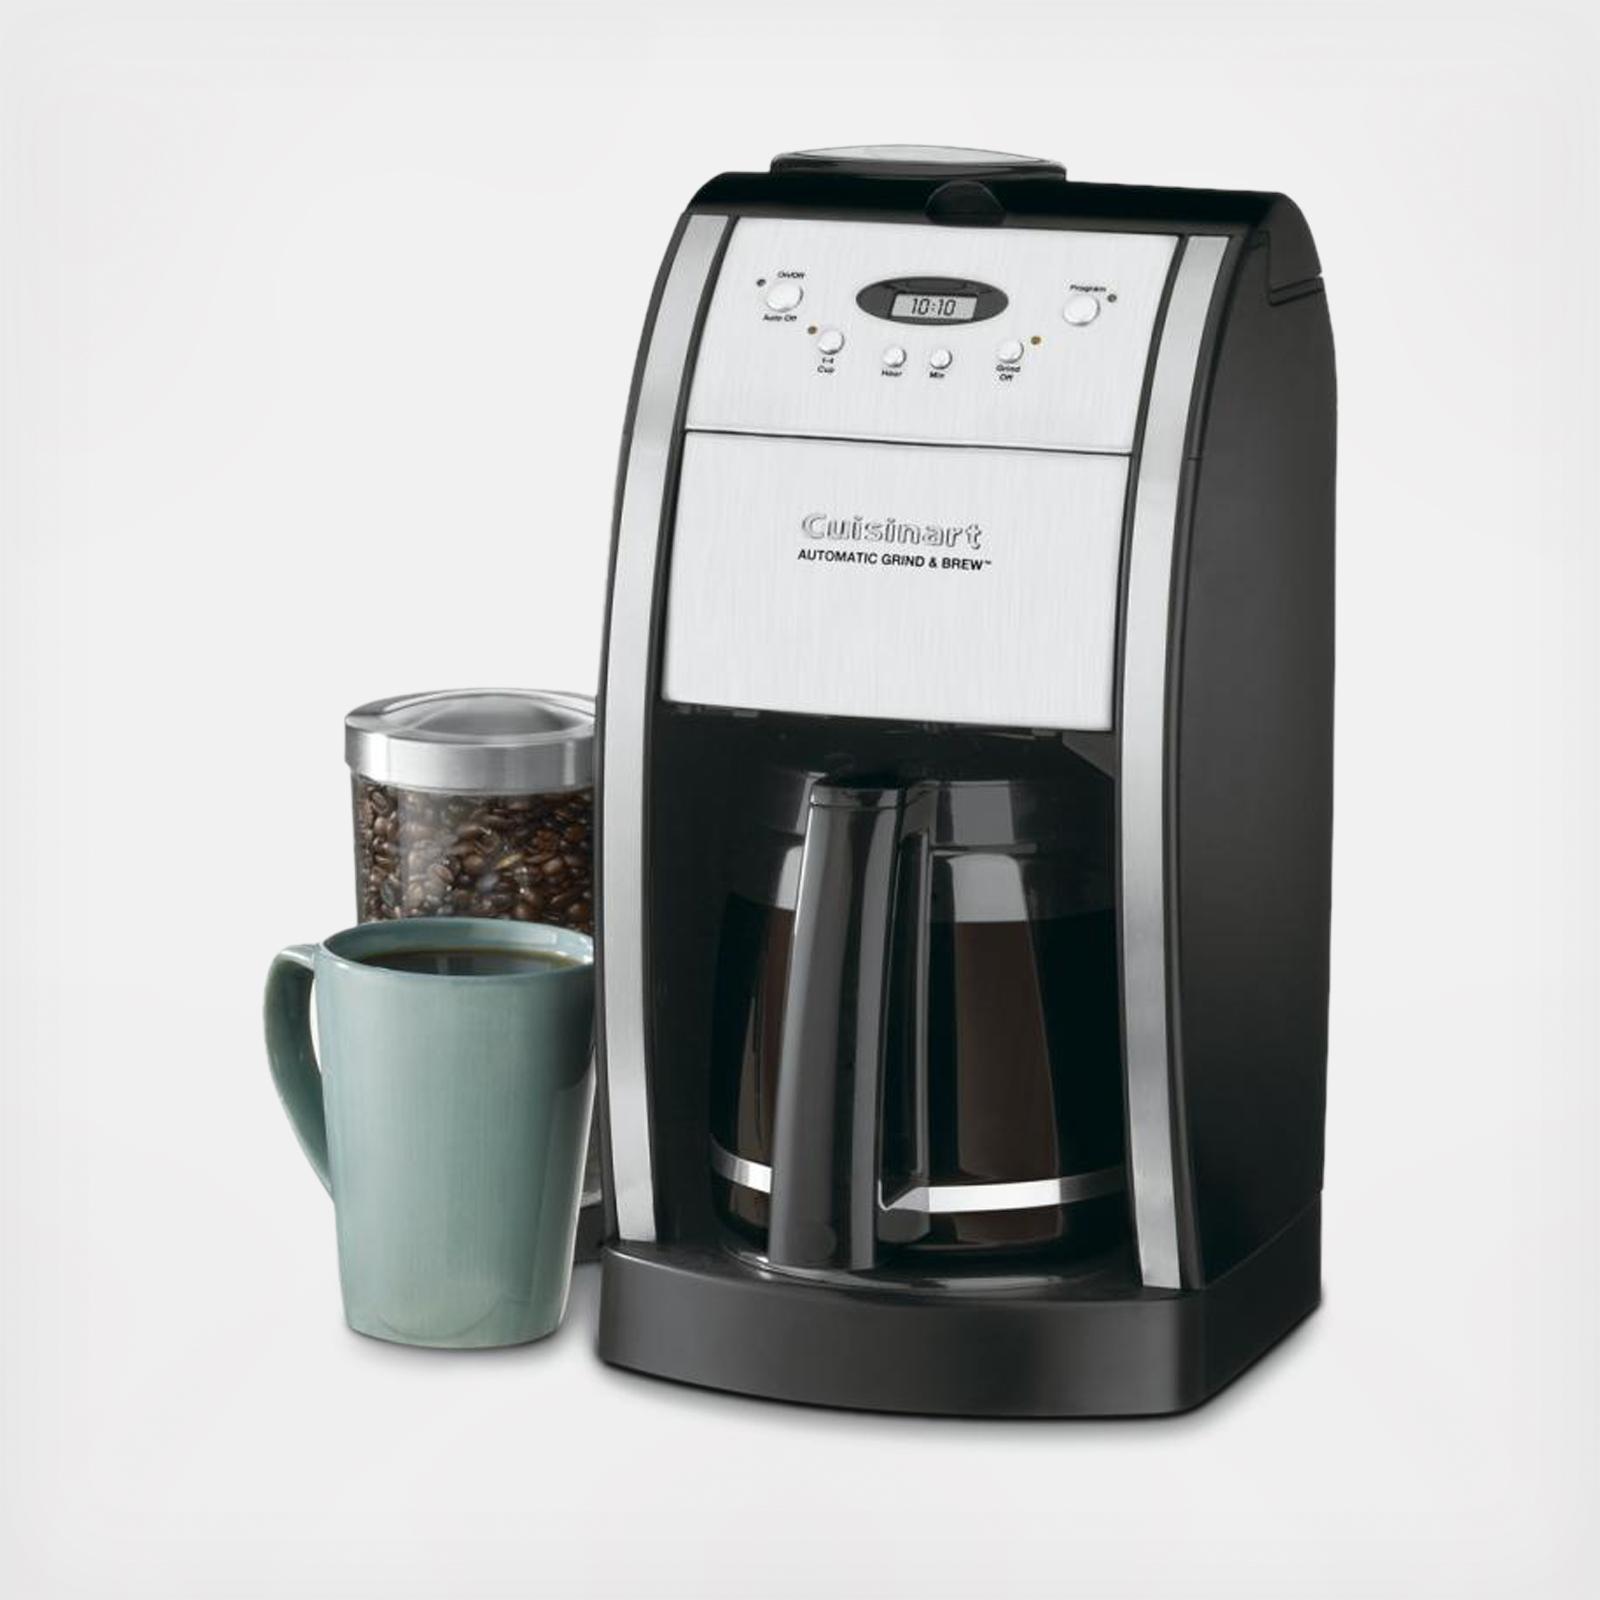 Cuisinart Coffee Grinder, Black - Shop Coffee Makers at H-E-B